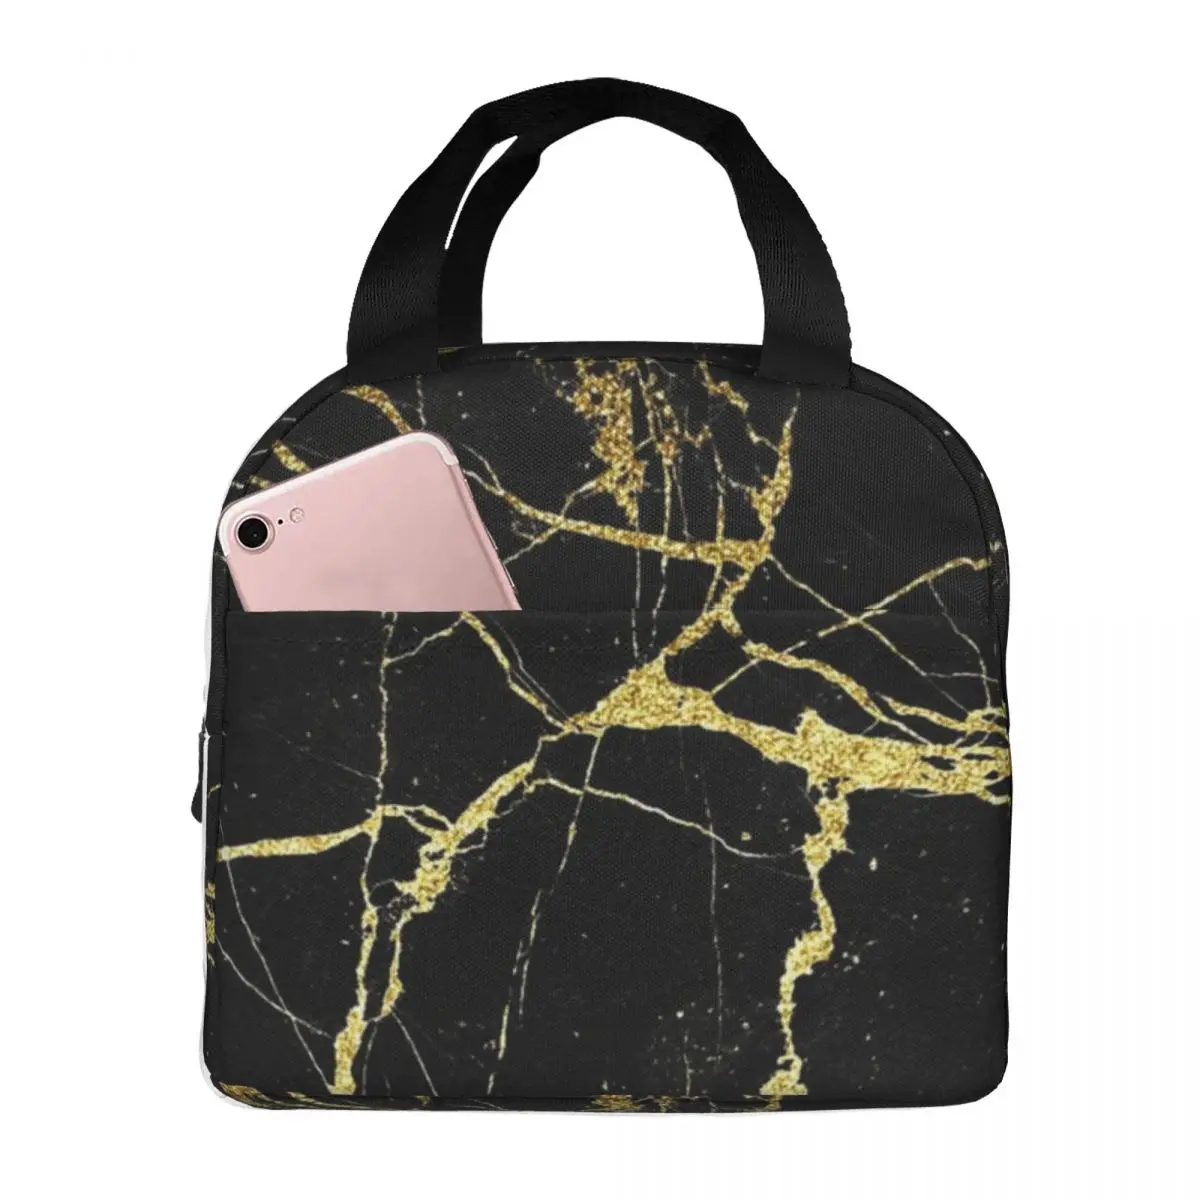 Lunch Bag for Men Women Black And Gold Marble Insulated Cooler Waterproof Picnic Work Oxford Lunch Box Handbags